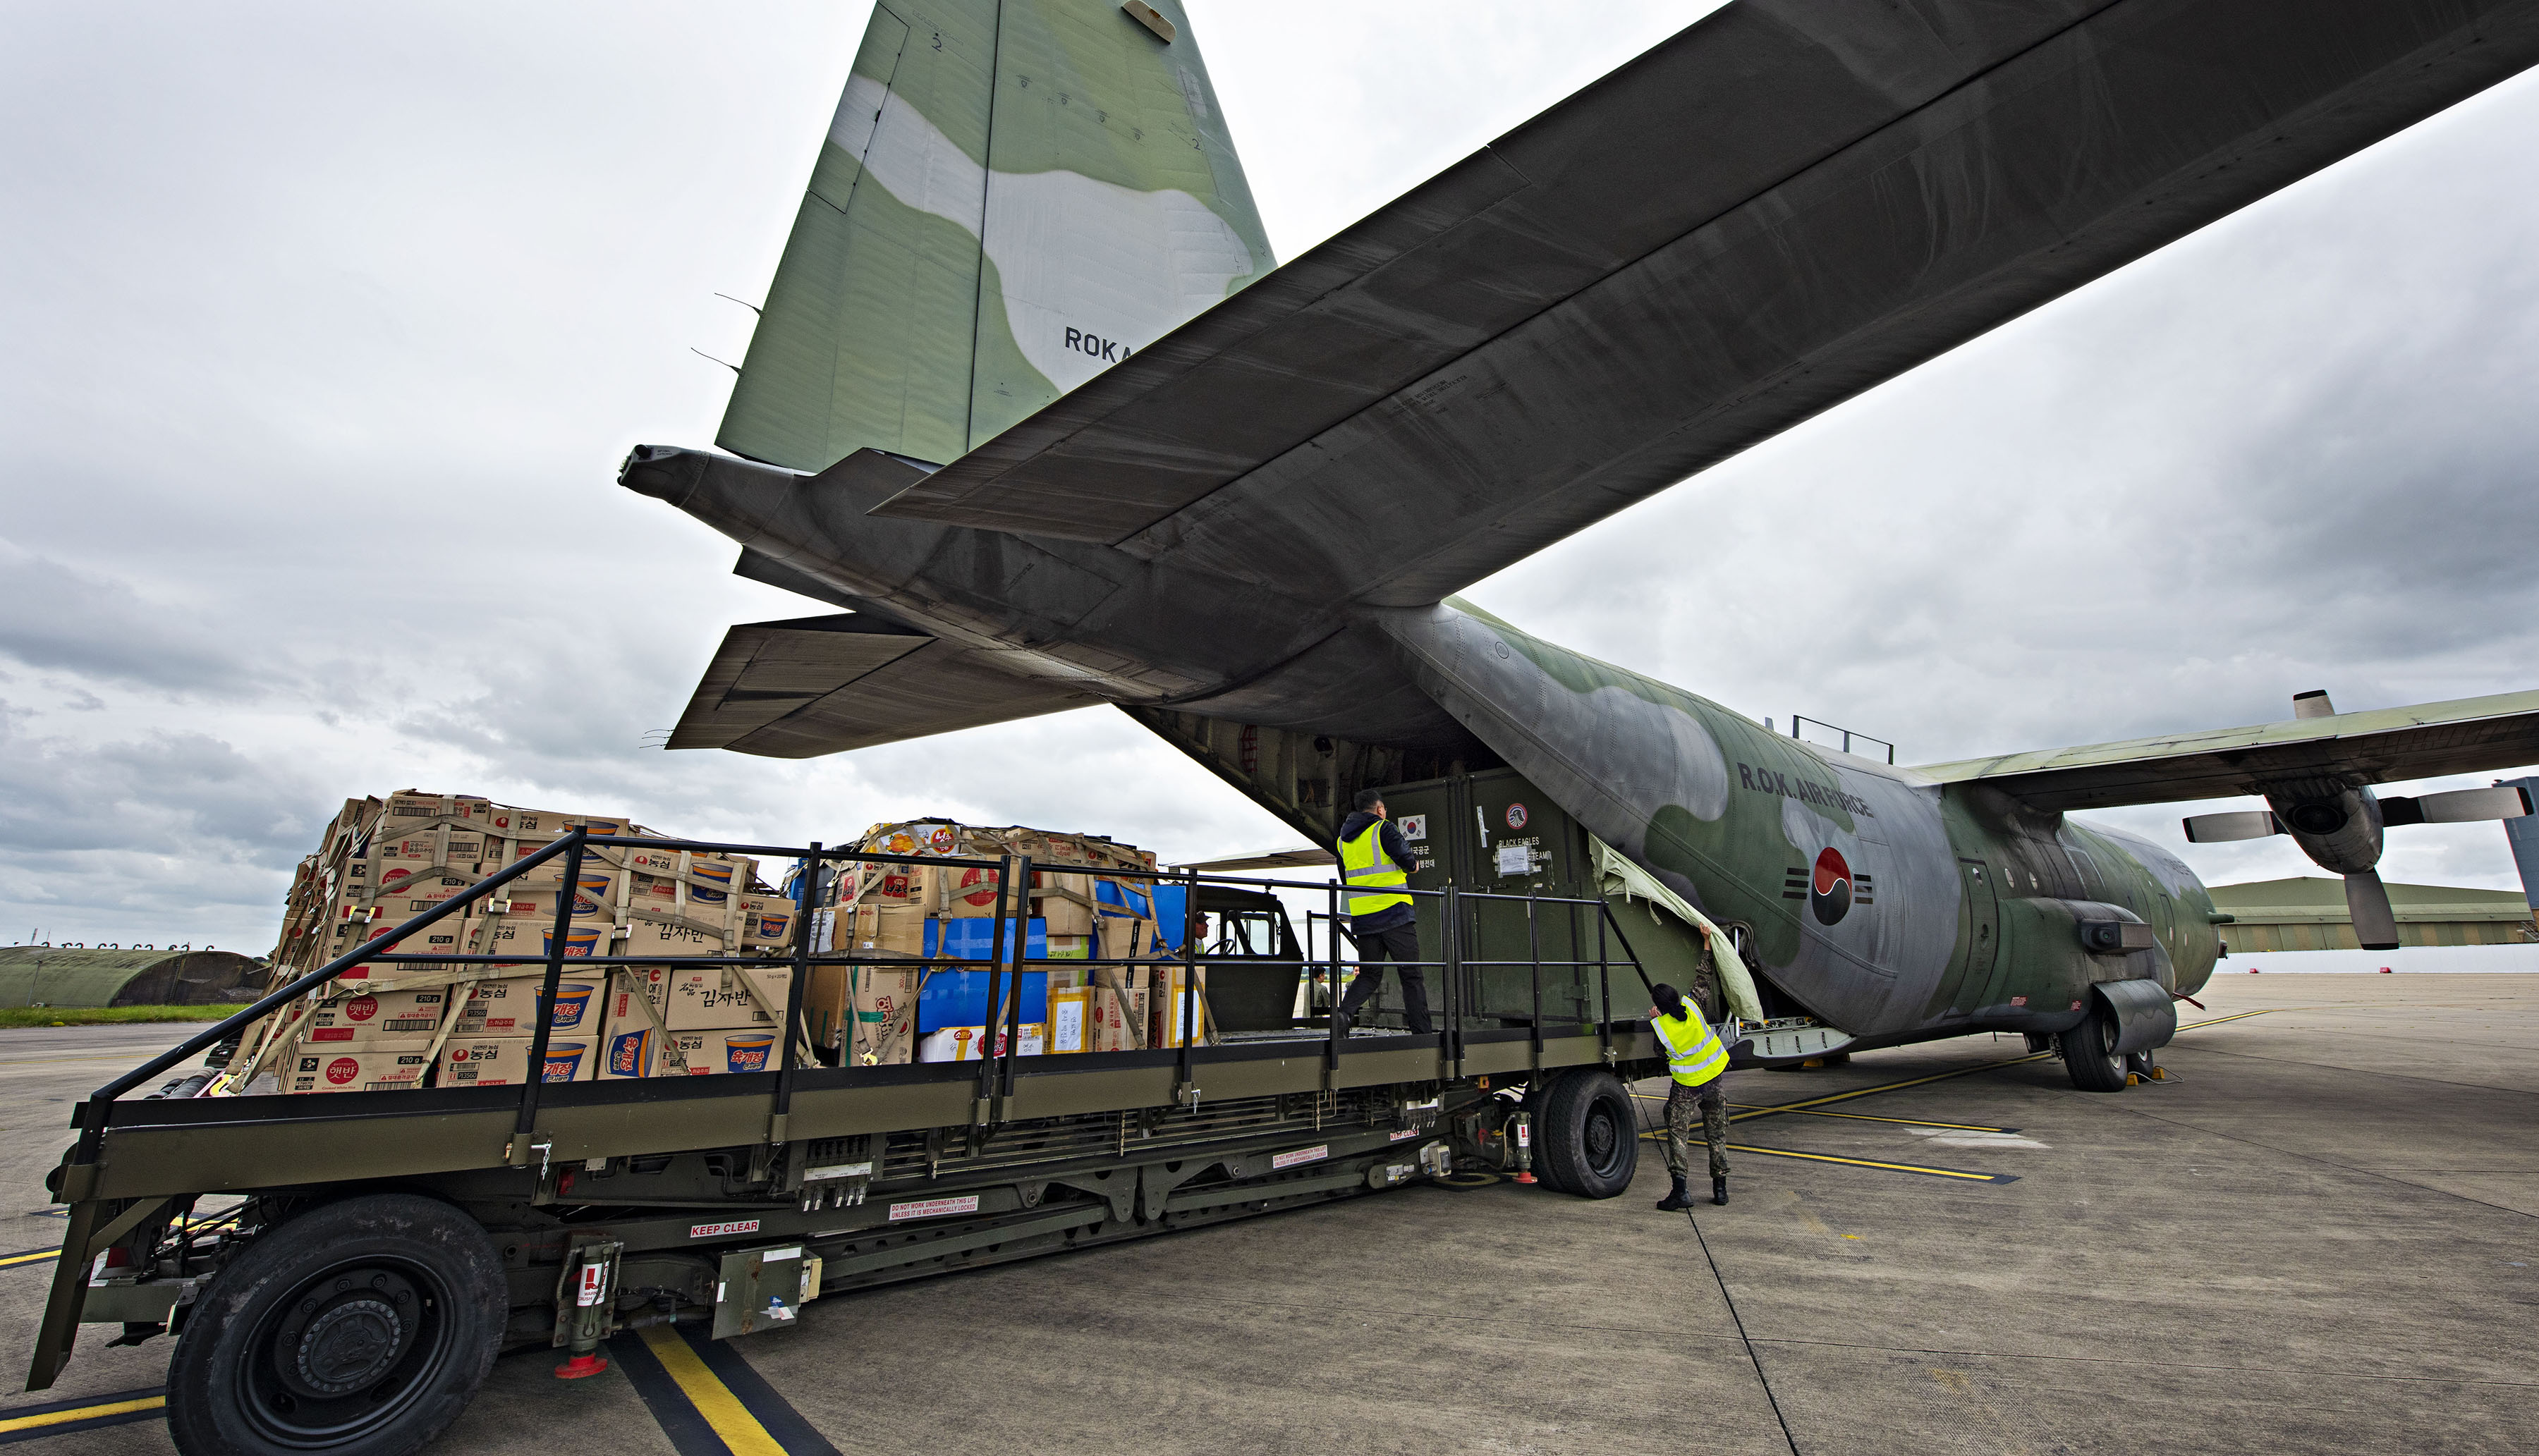 Image shows C-130 carrier aircraft with loading bay open and cargo. 